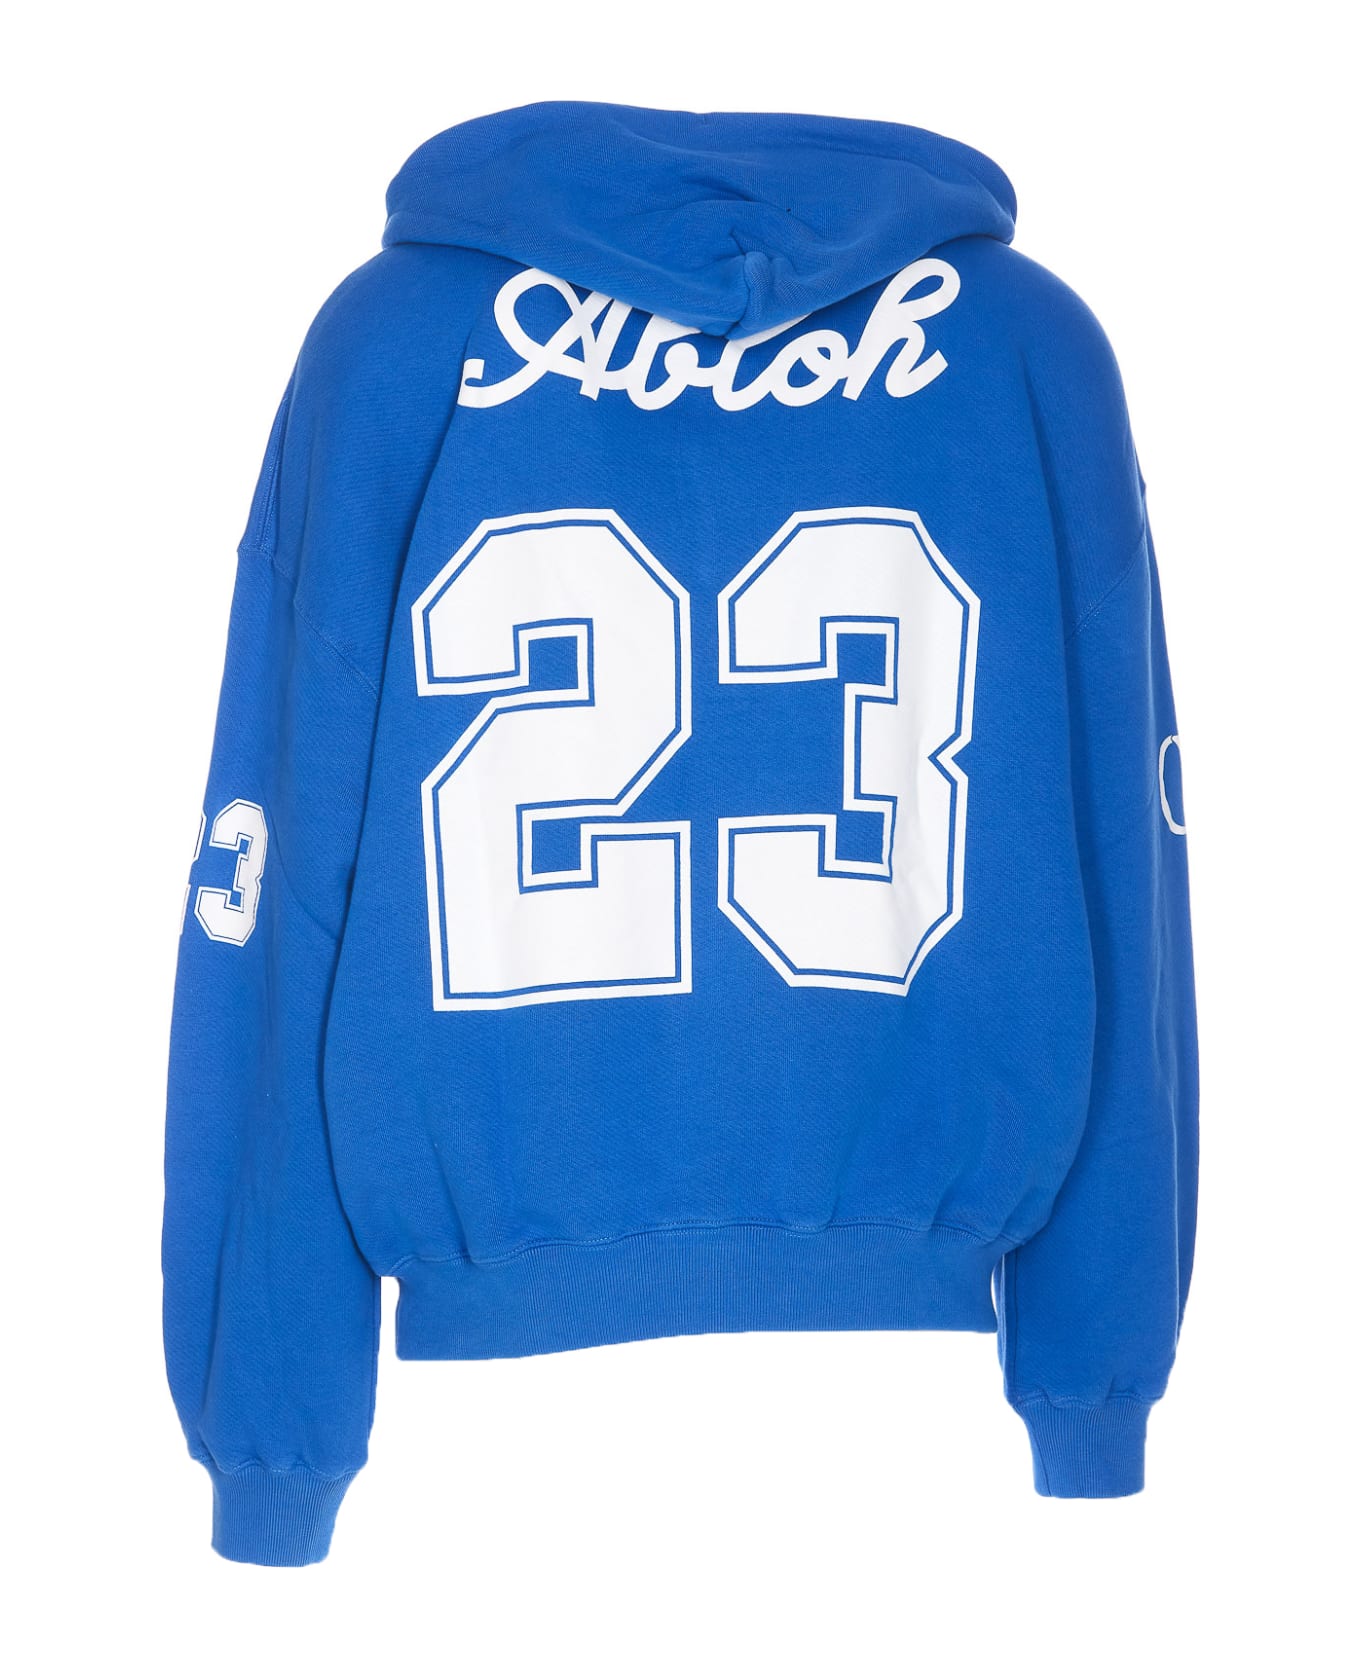 Off-White Football Over Hoodie - BLUE